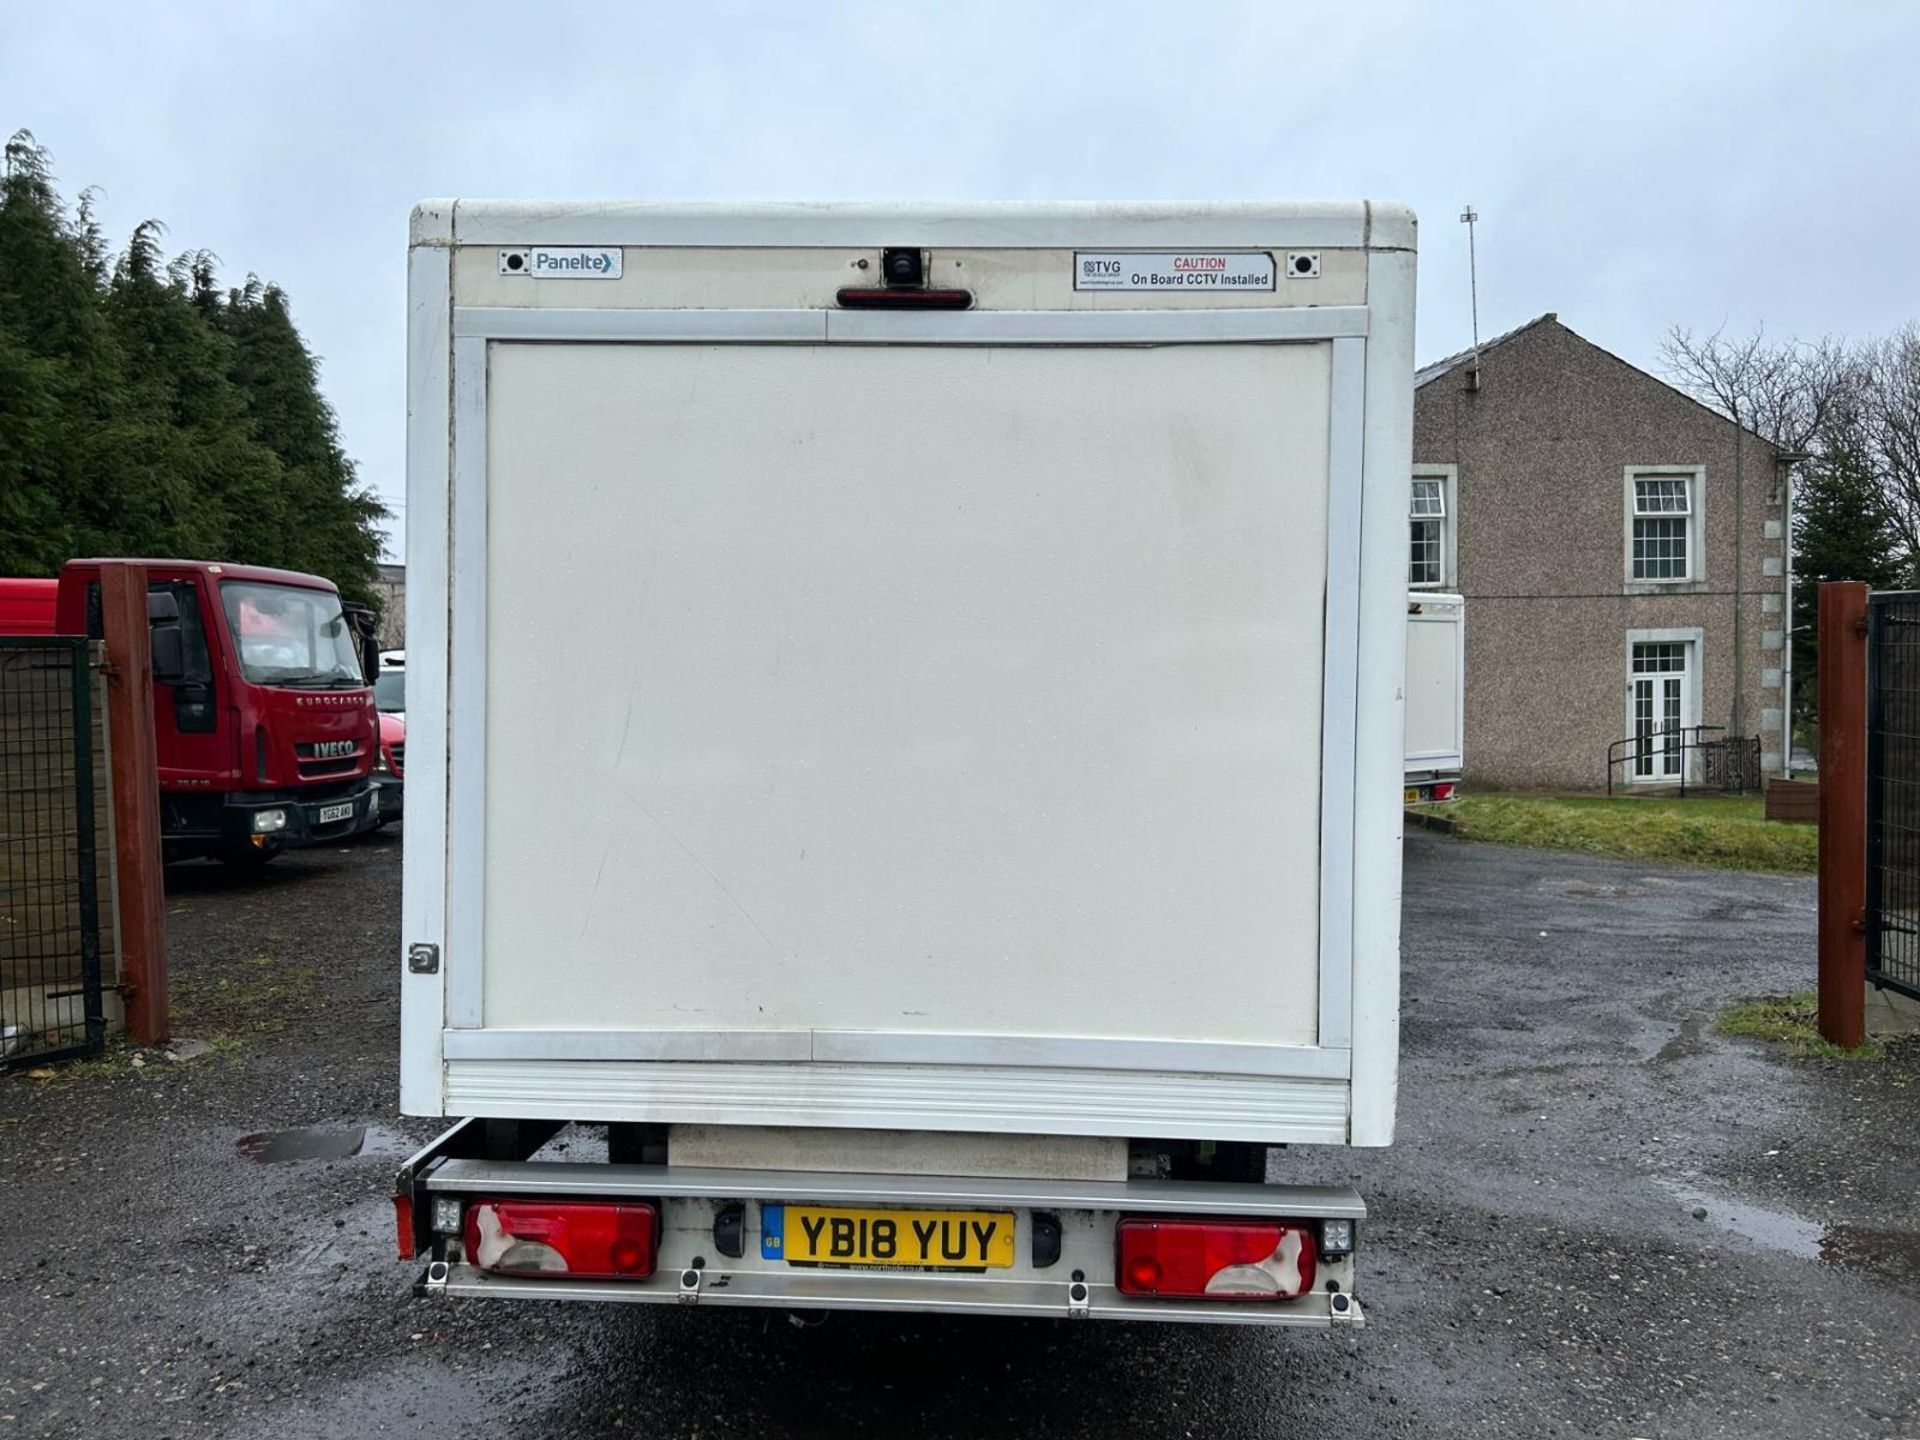 >>>SPECIAL CLEARANCE<<< 2018 MERCEDES-BENZ SPRINTER 314 CDI FRIDGE FREEZER CHASSIS CAB - Image 11 of 13